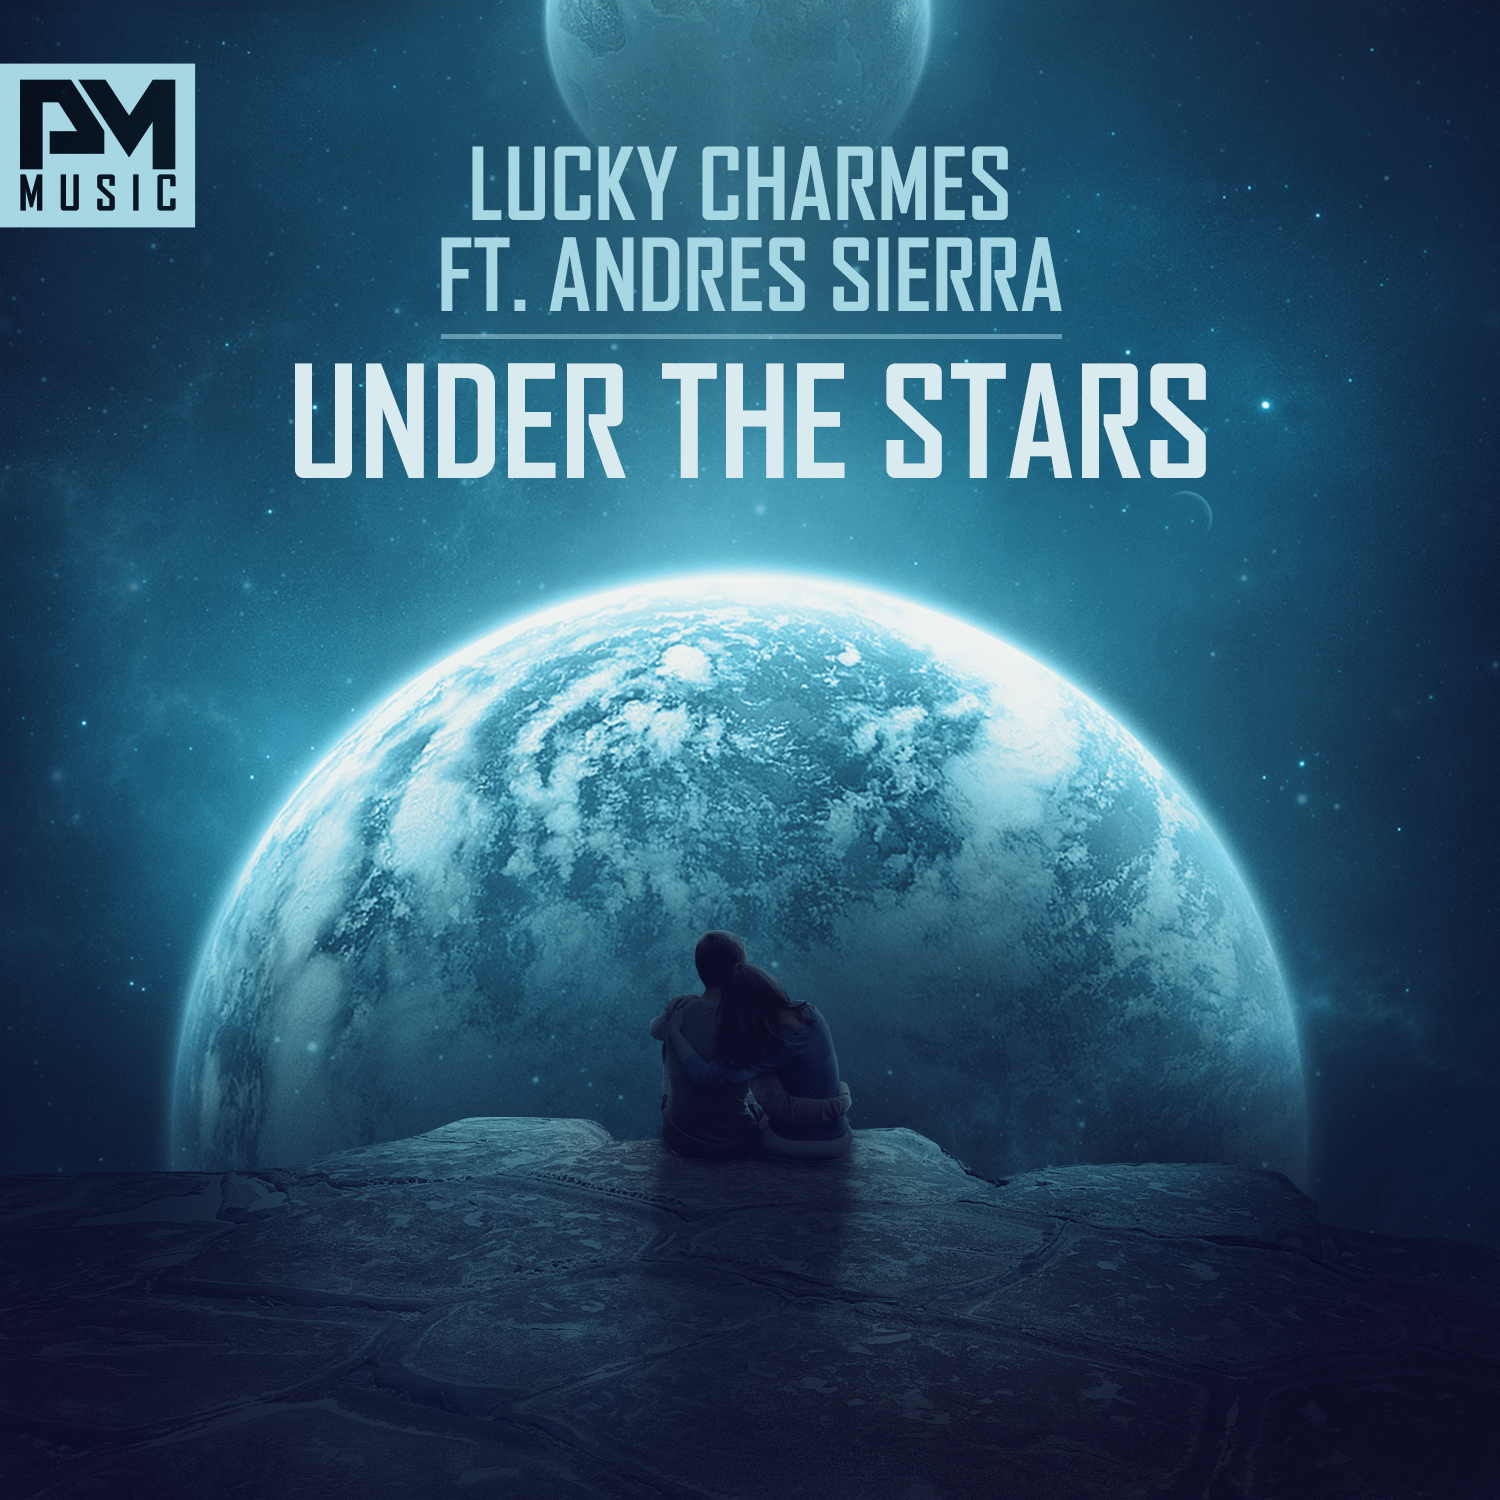 Under The Stars(Rocwell S Remix)